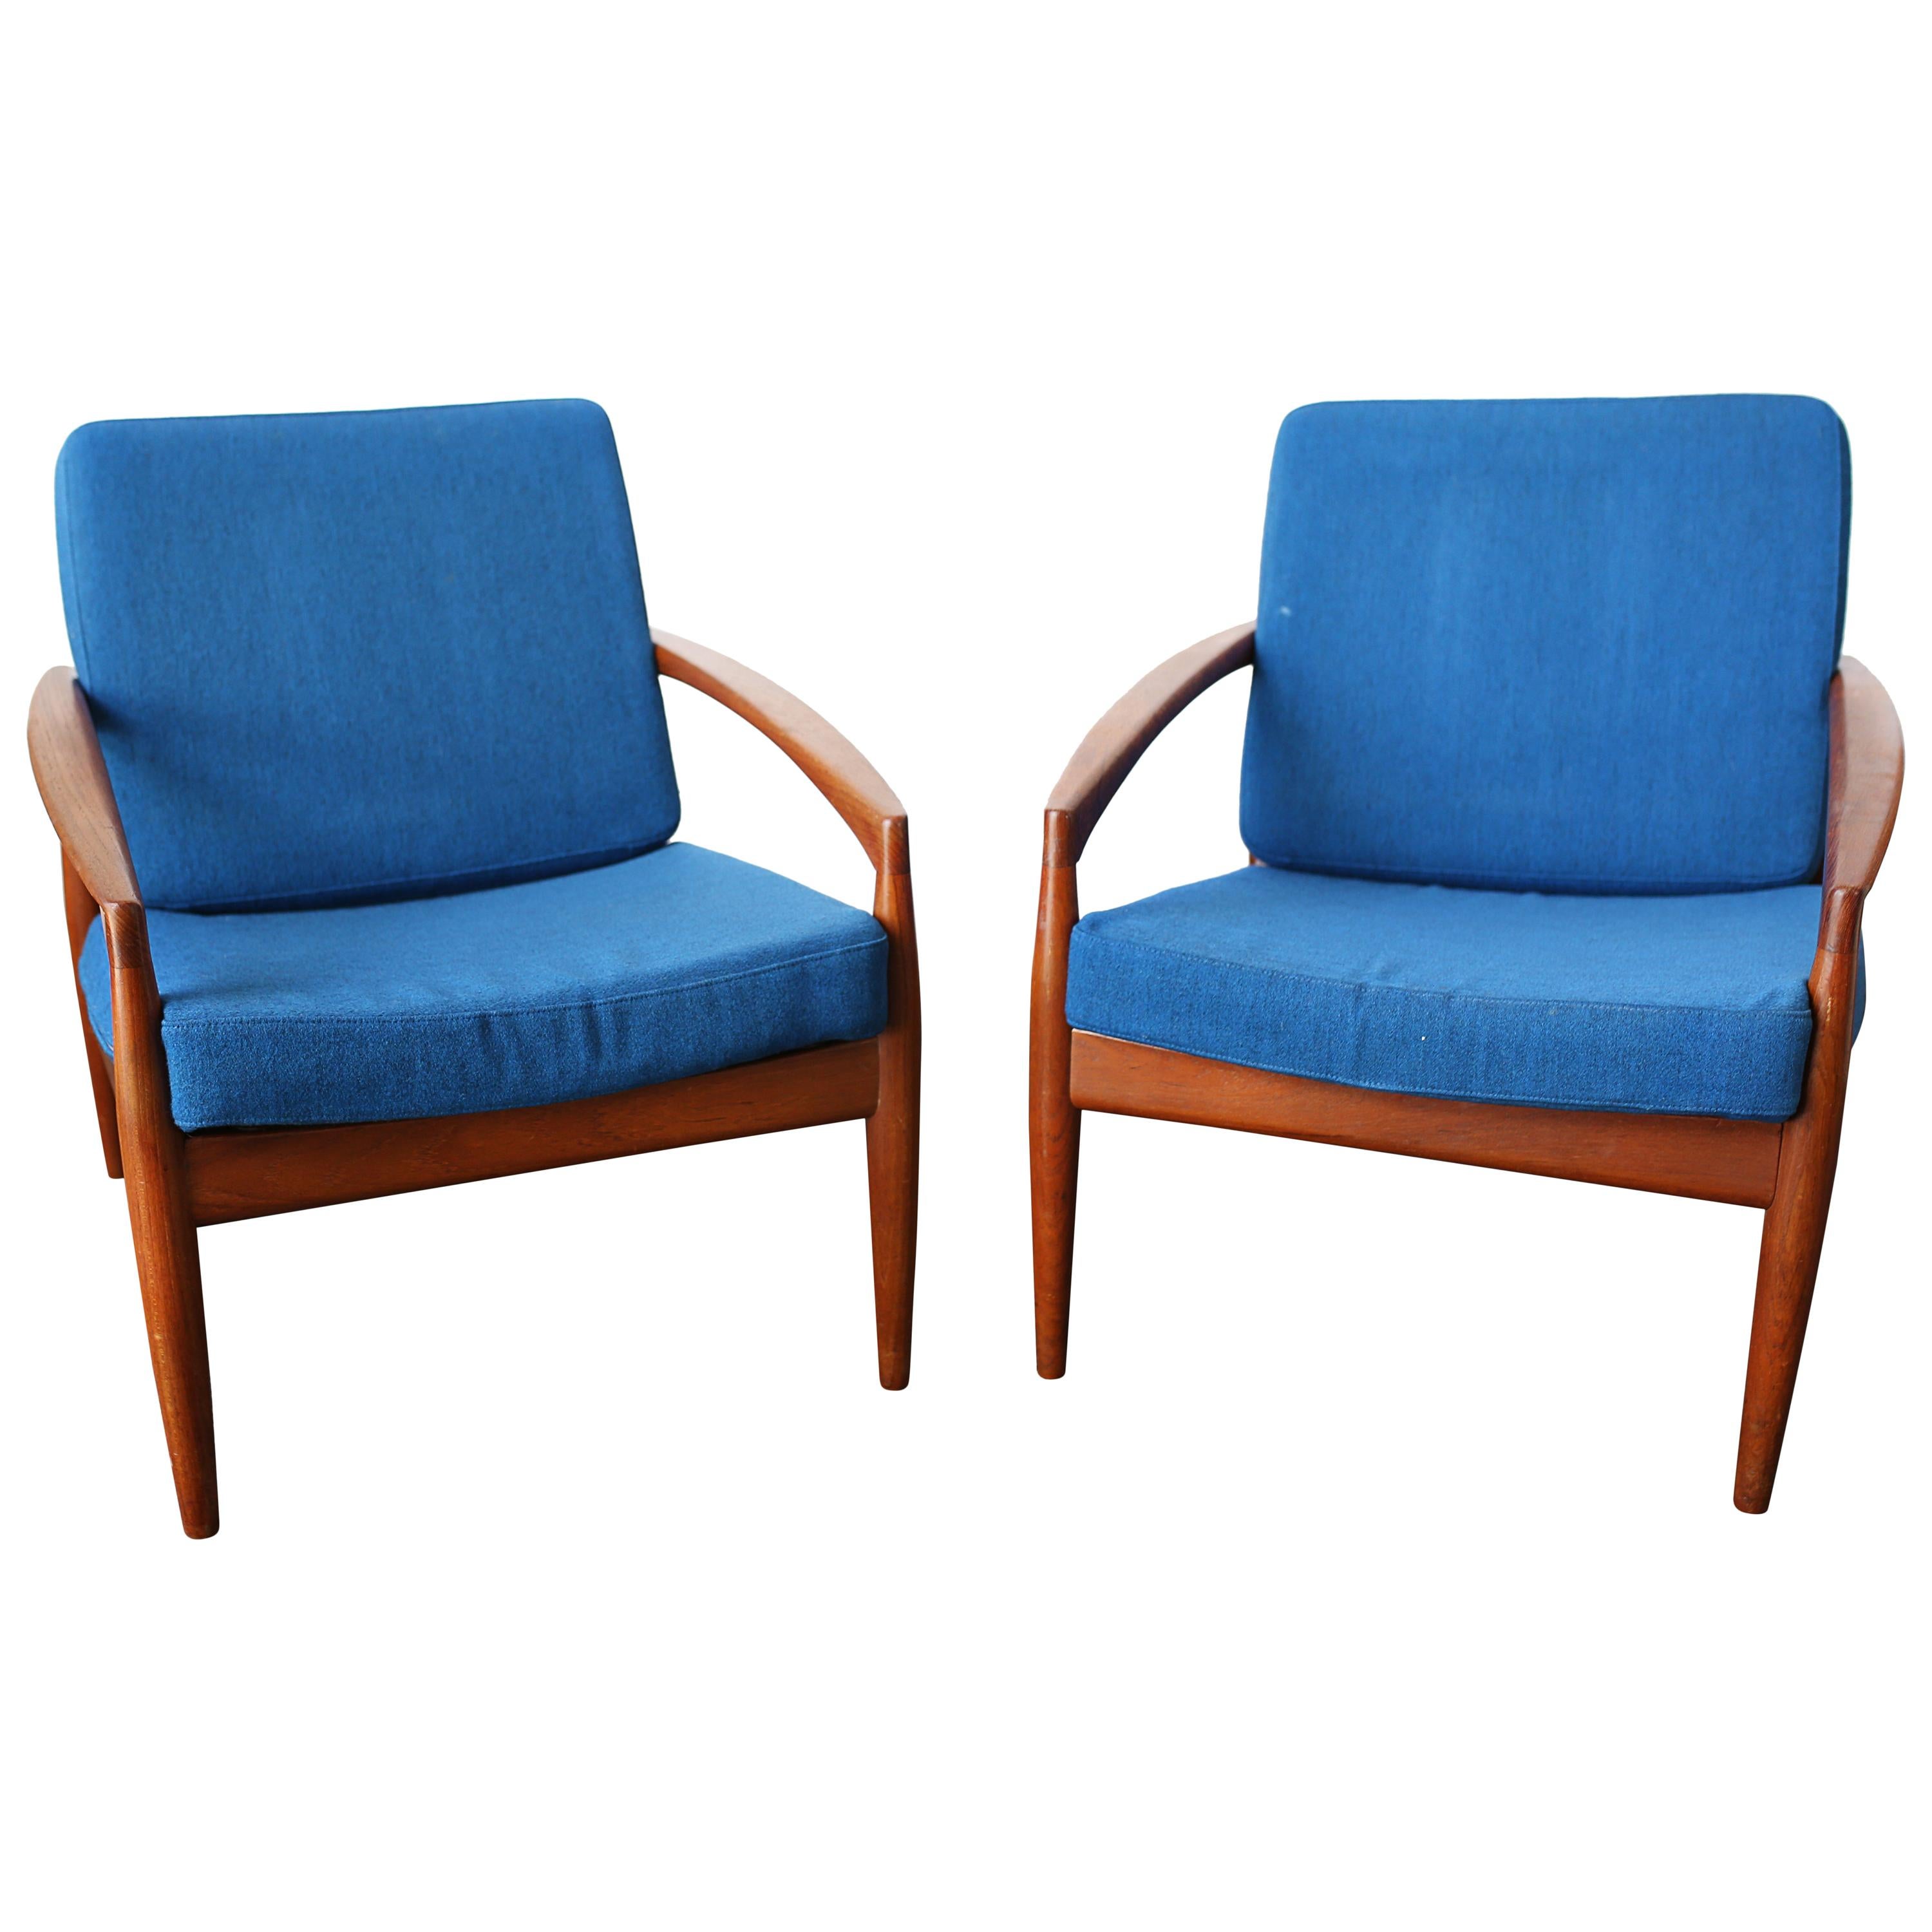 Pair of Solid Teak 'Paper Knife' Lounge Chairs by Kai Kristiansen, 1955